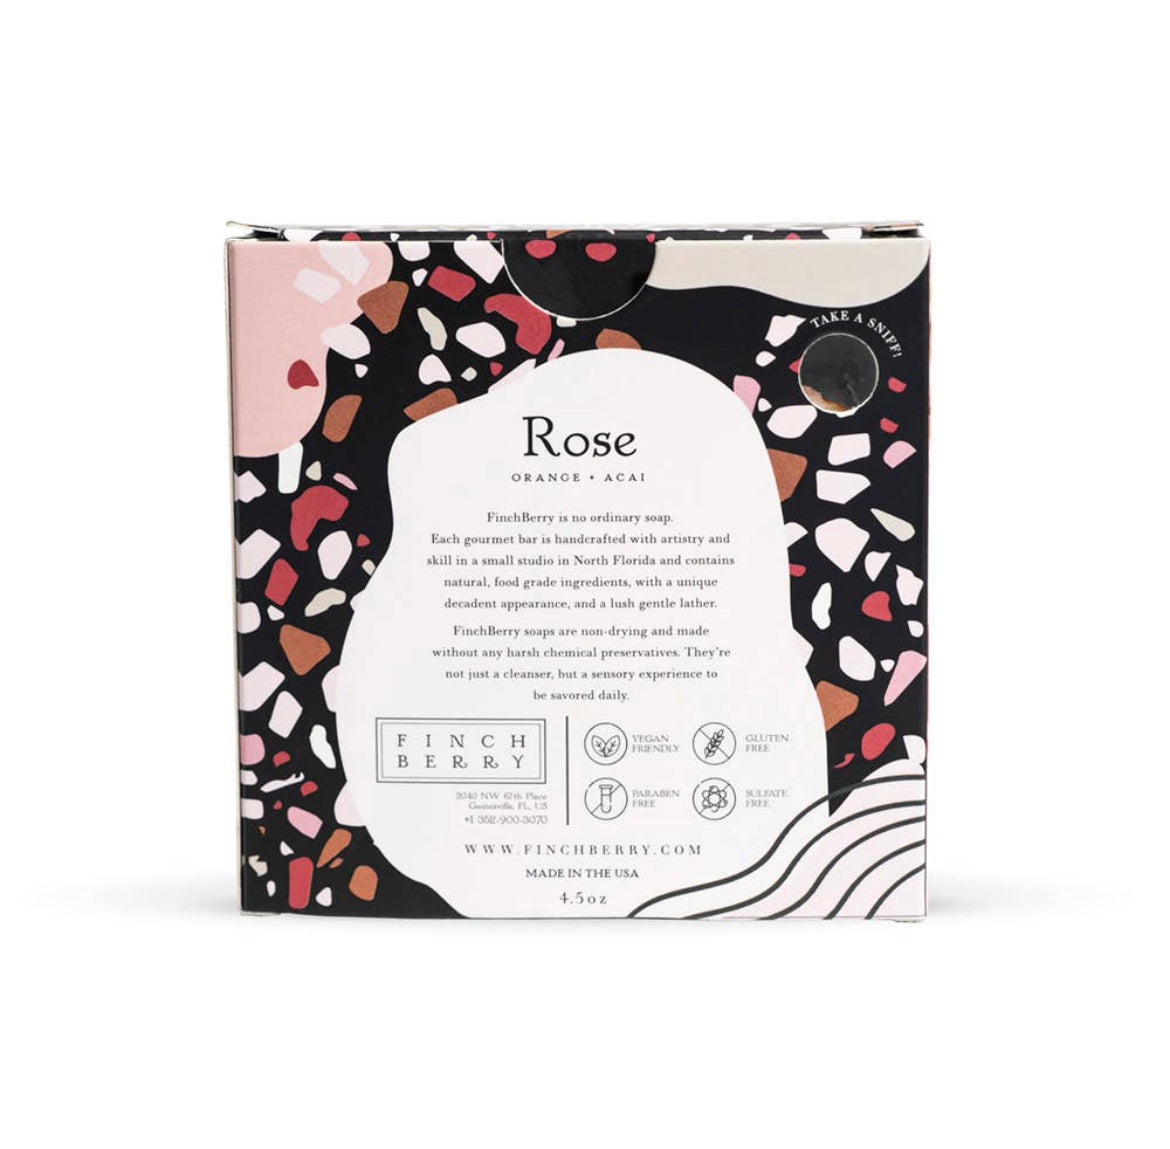 Finchberry Rose soap